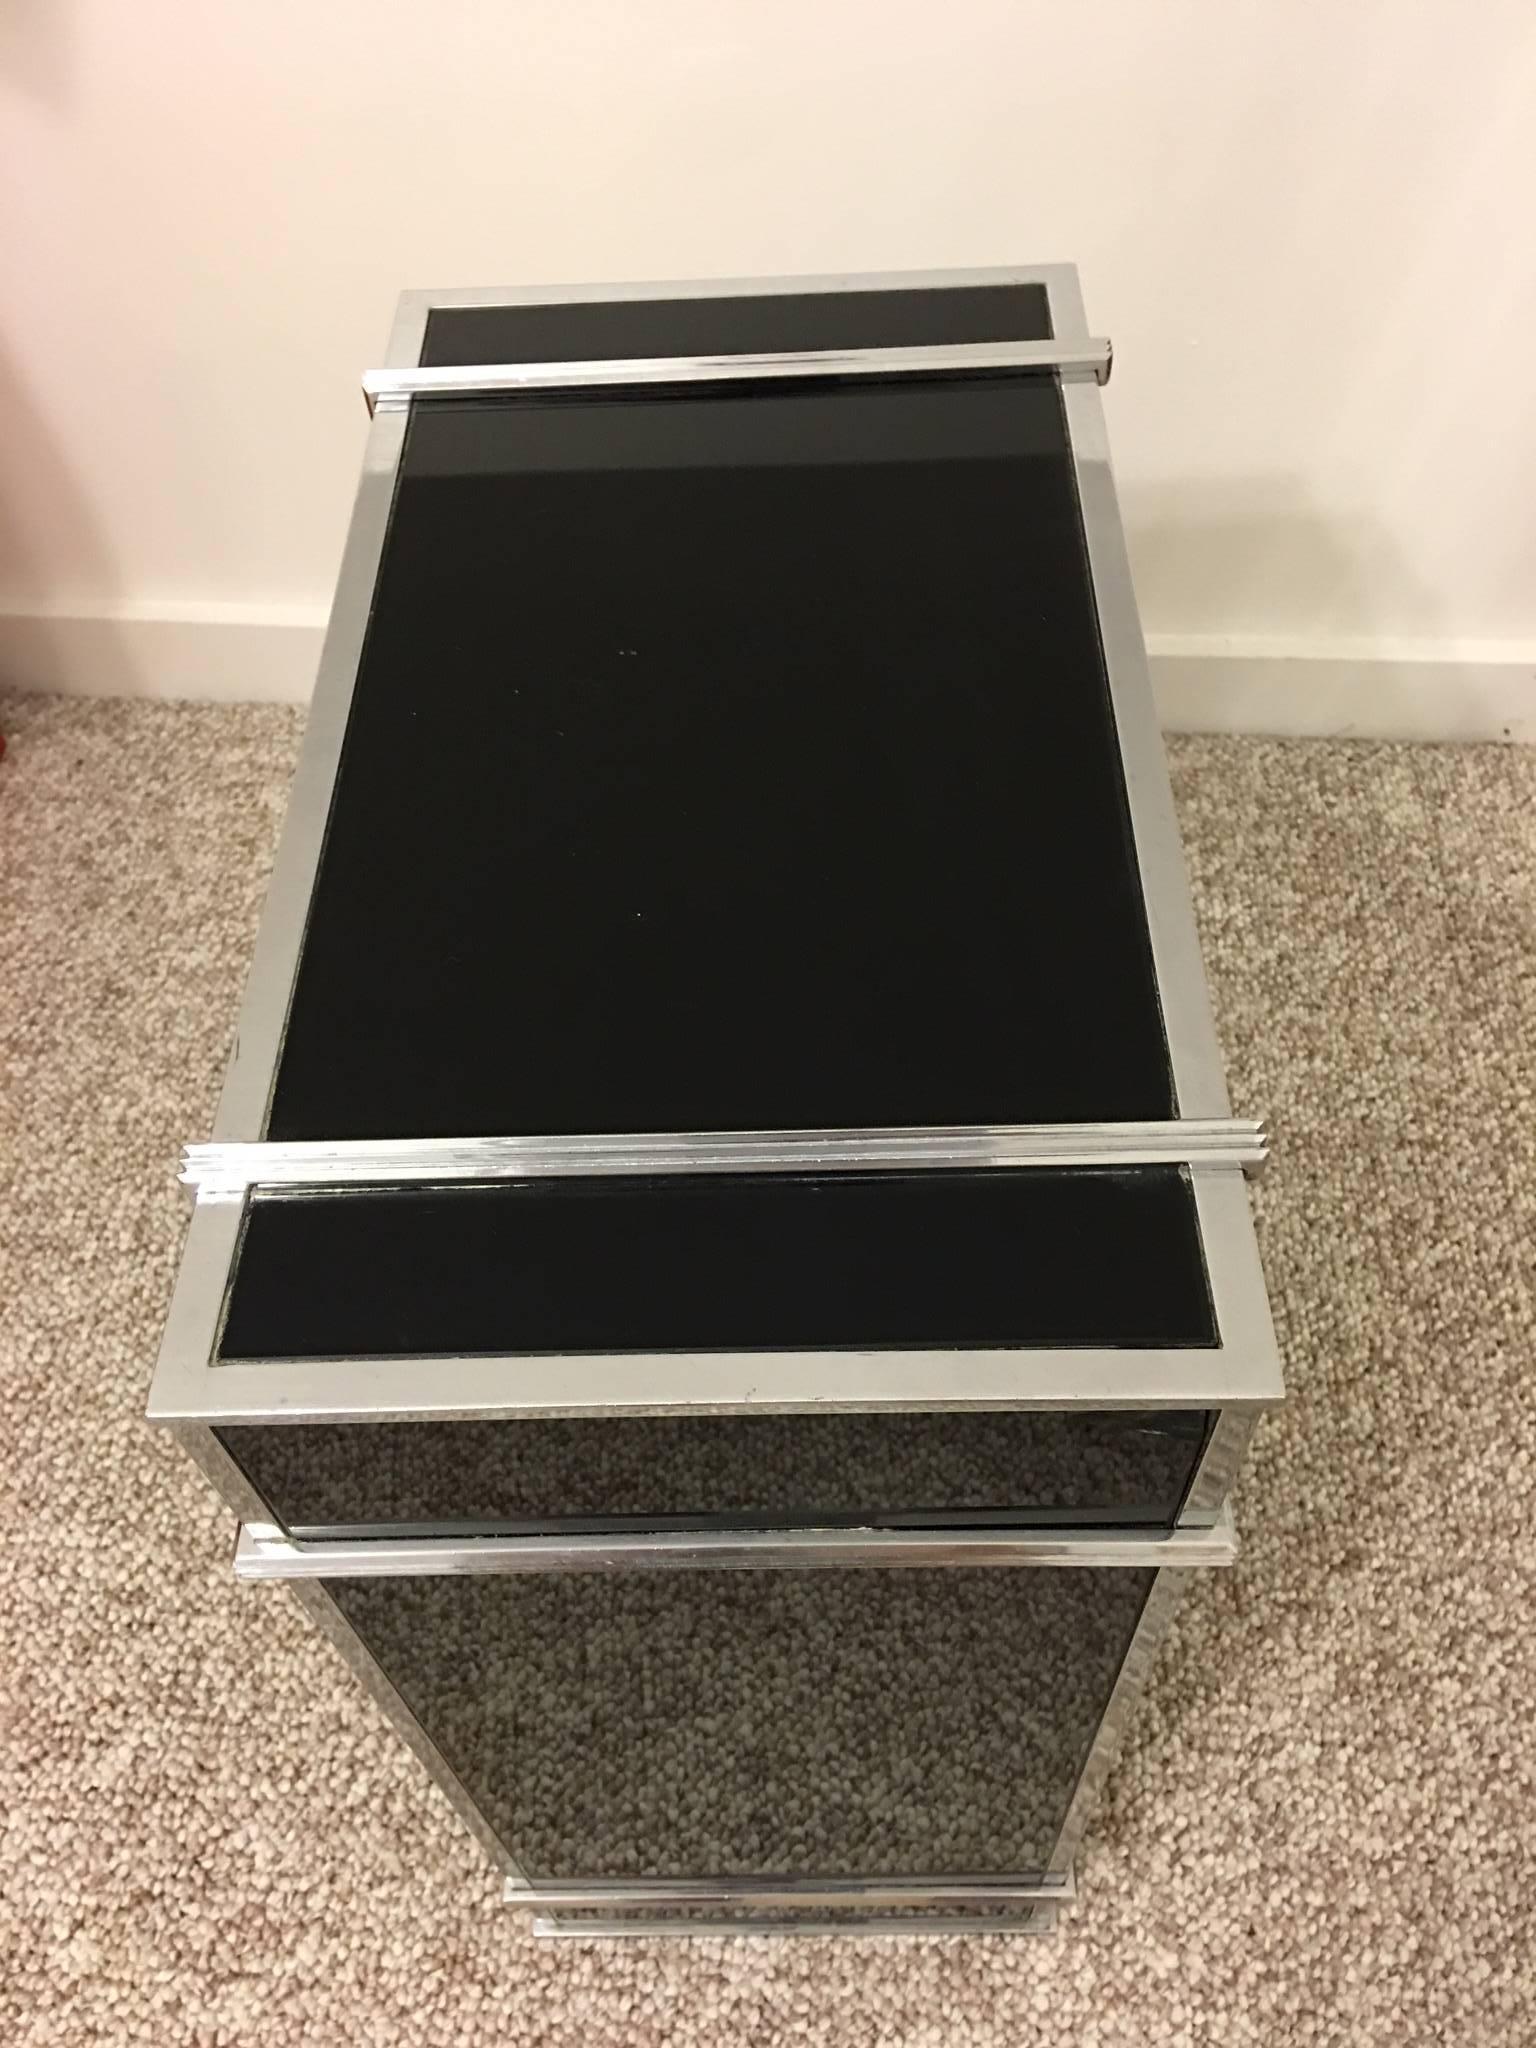 Superb Modernist Raymond Hood Art Deco Black Glass and Chrome Clothing Hamper  In Excellent Condition For Sale In Mount Penn, PA